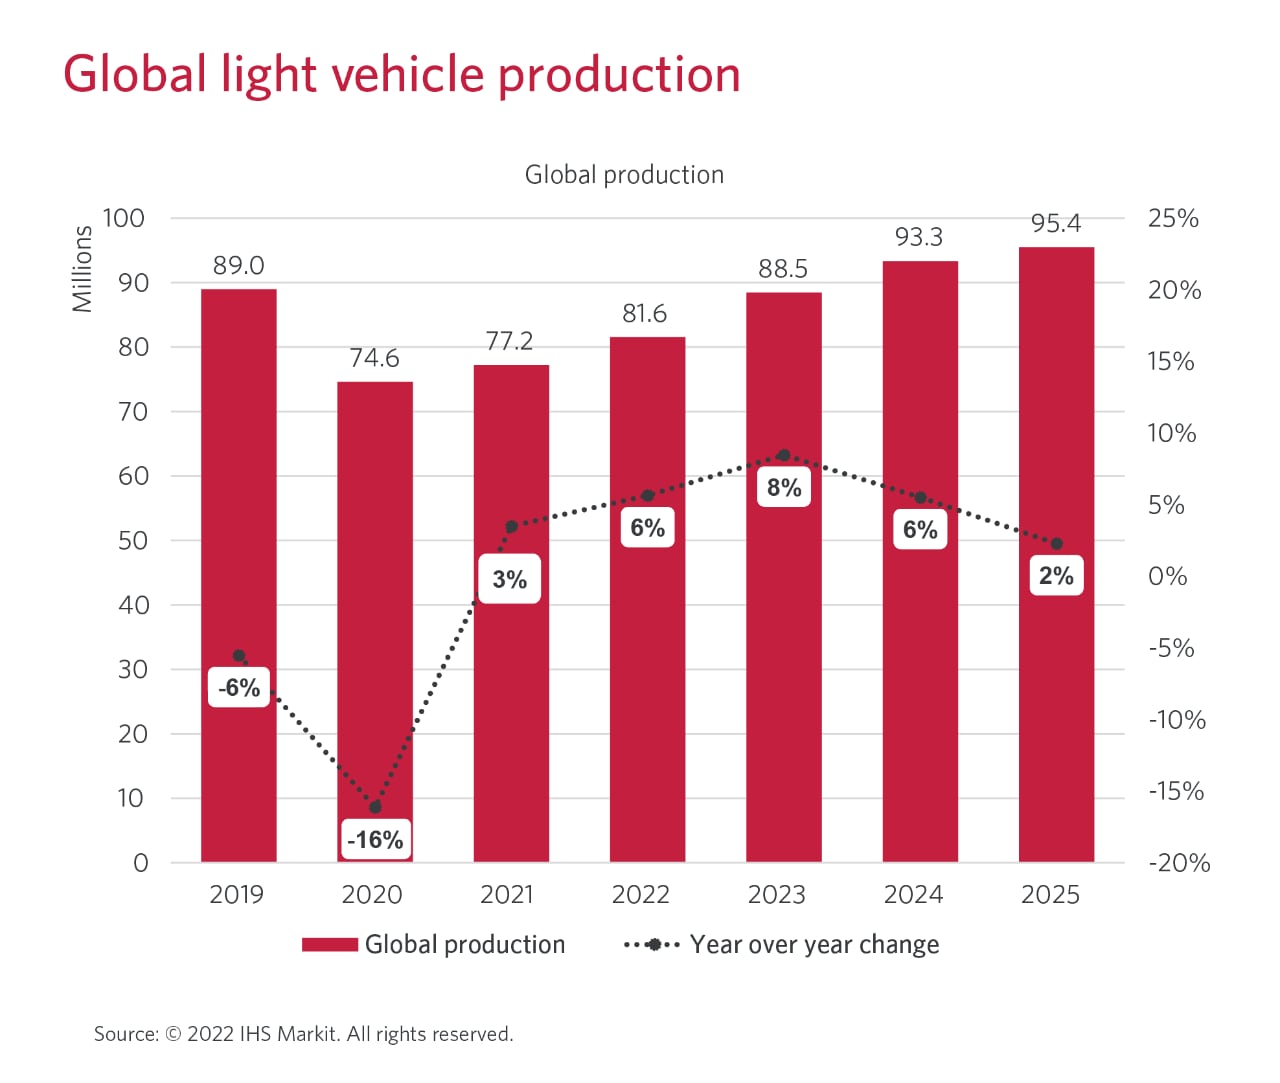  Graph showing a sharp decrease of 16 % in global light vehicle production in 2020.